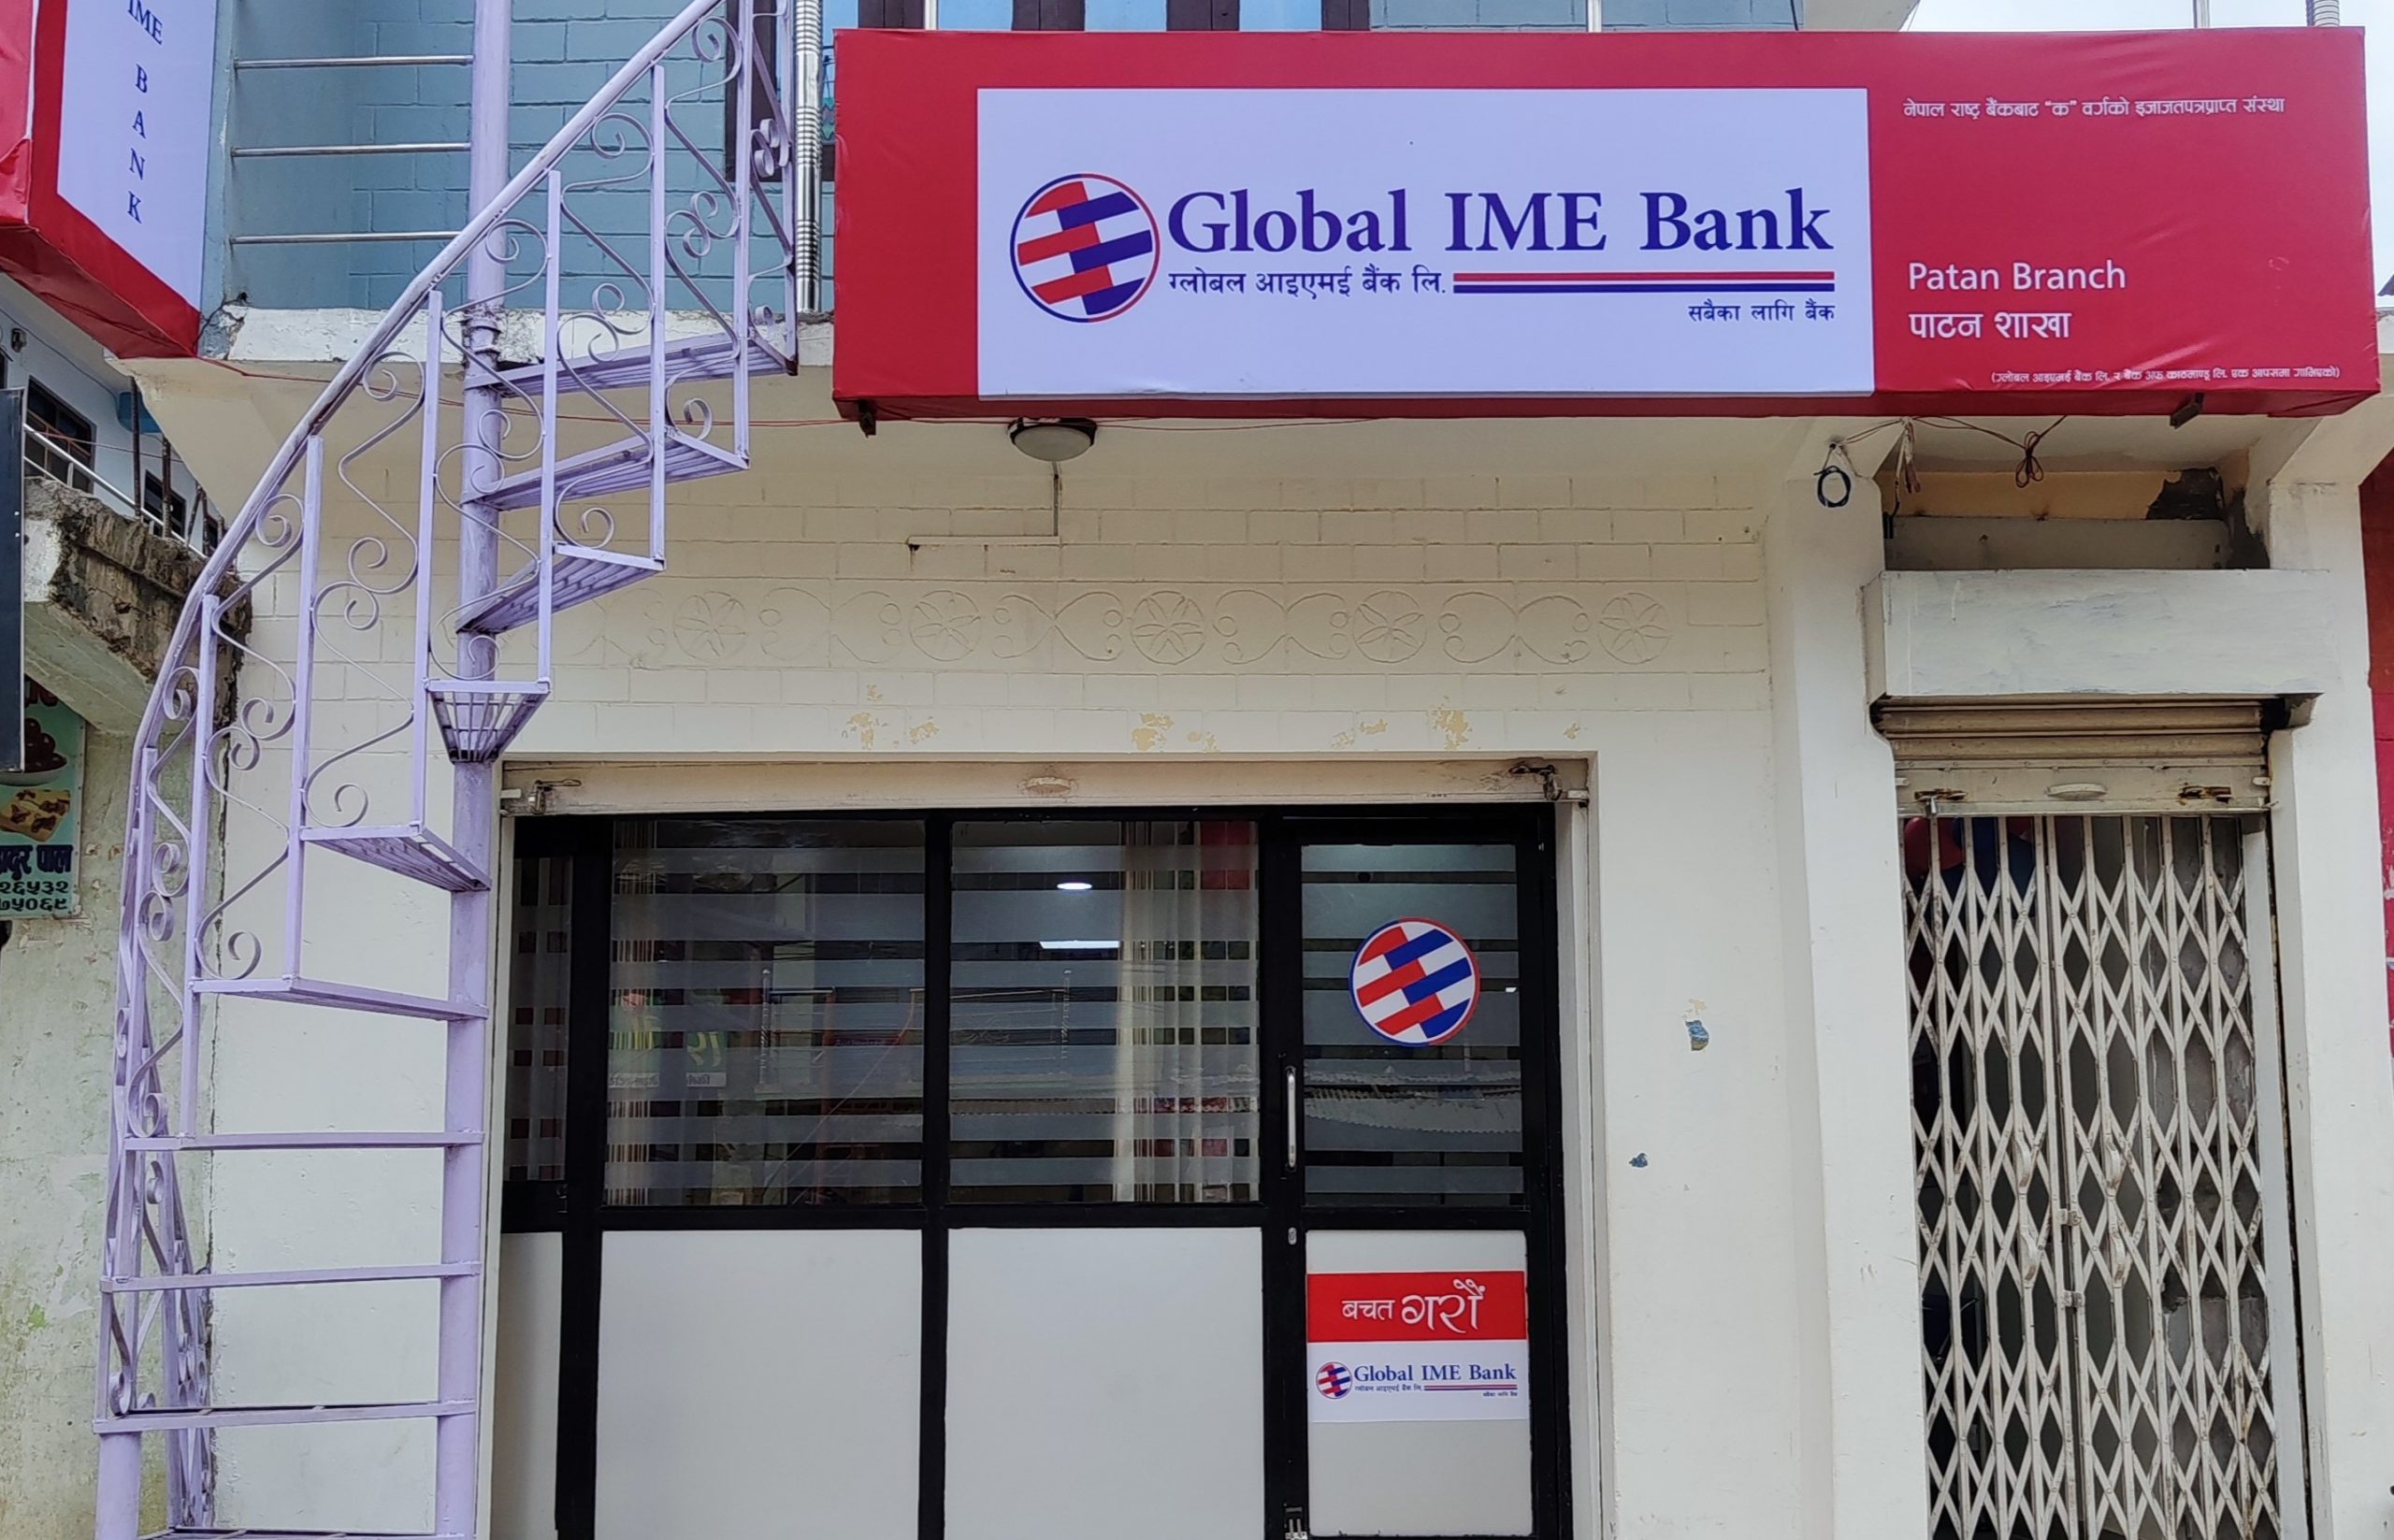 Global IME Bank expands network with new branch in Patan Bazaar